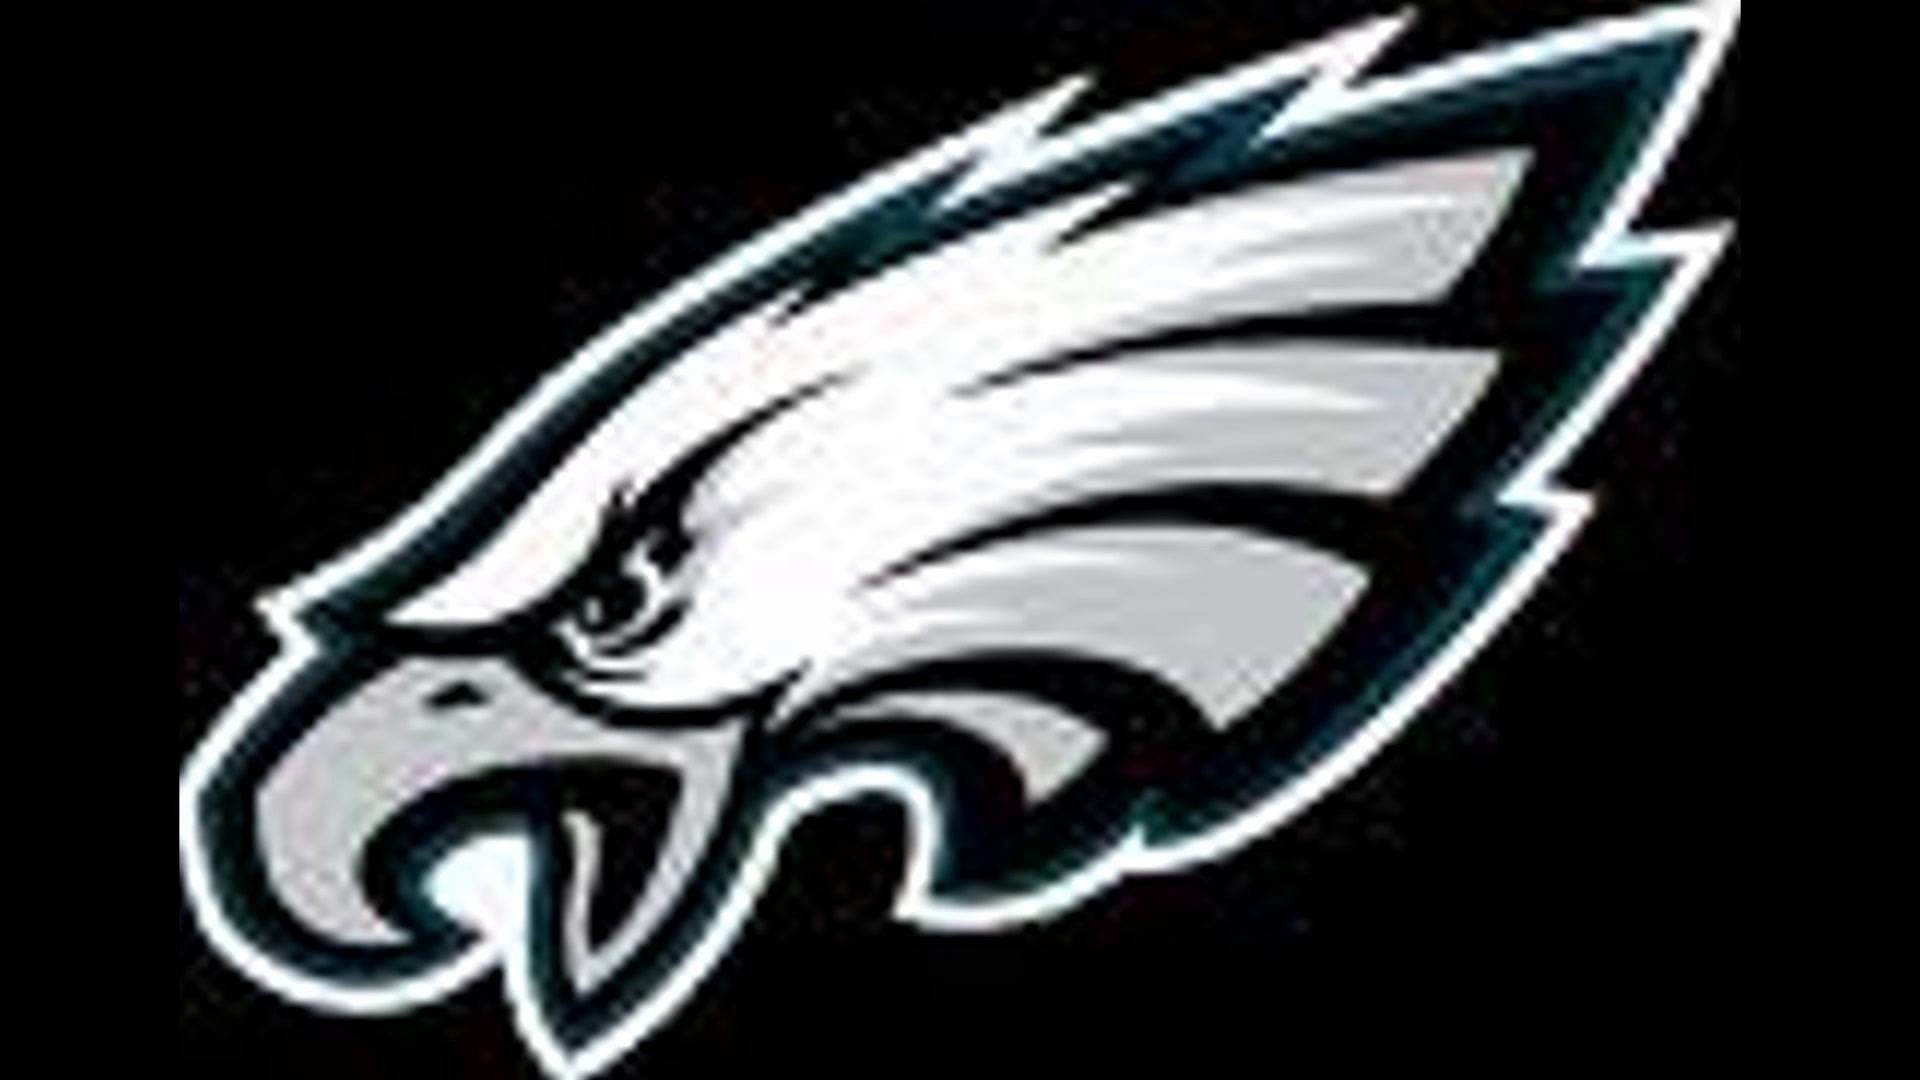 1920x1080 Final Rant on EDP,Blackout game Eagles vs Giants and Eagles fanbase hate -  YouTube